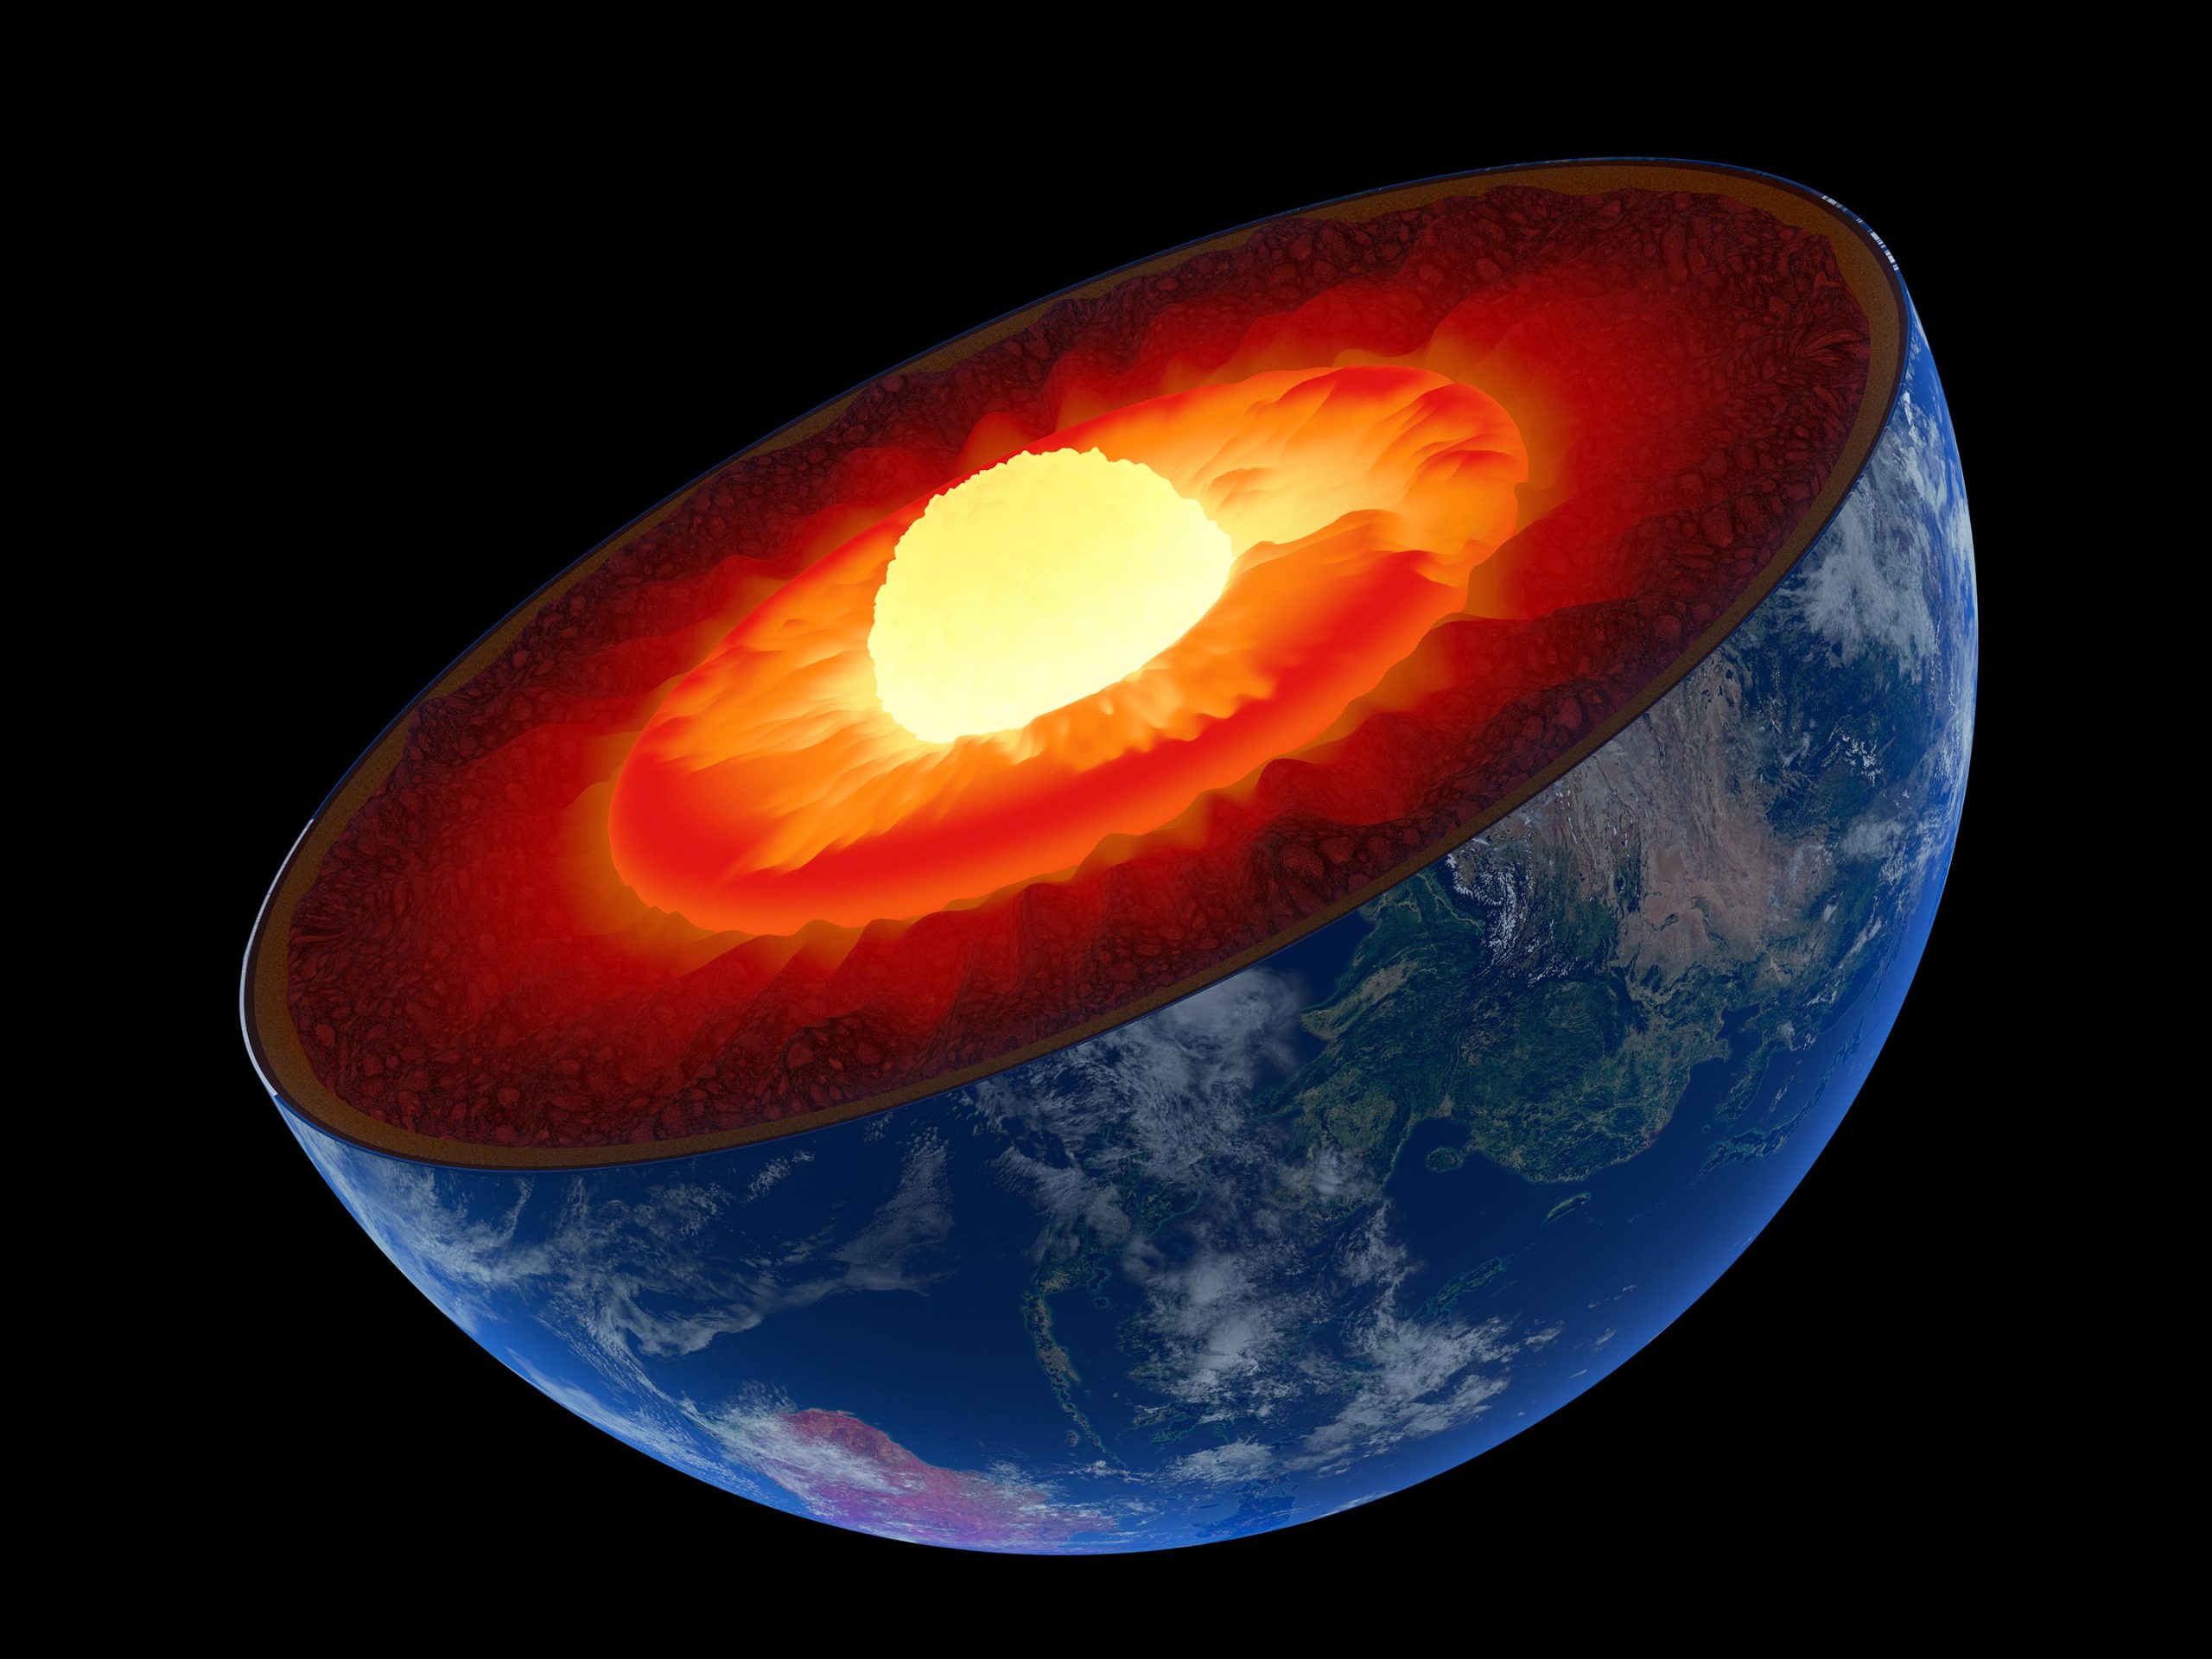 Science Facts - The Earth's core is hotter than the surface of the sun